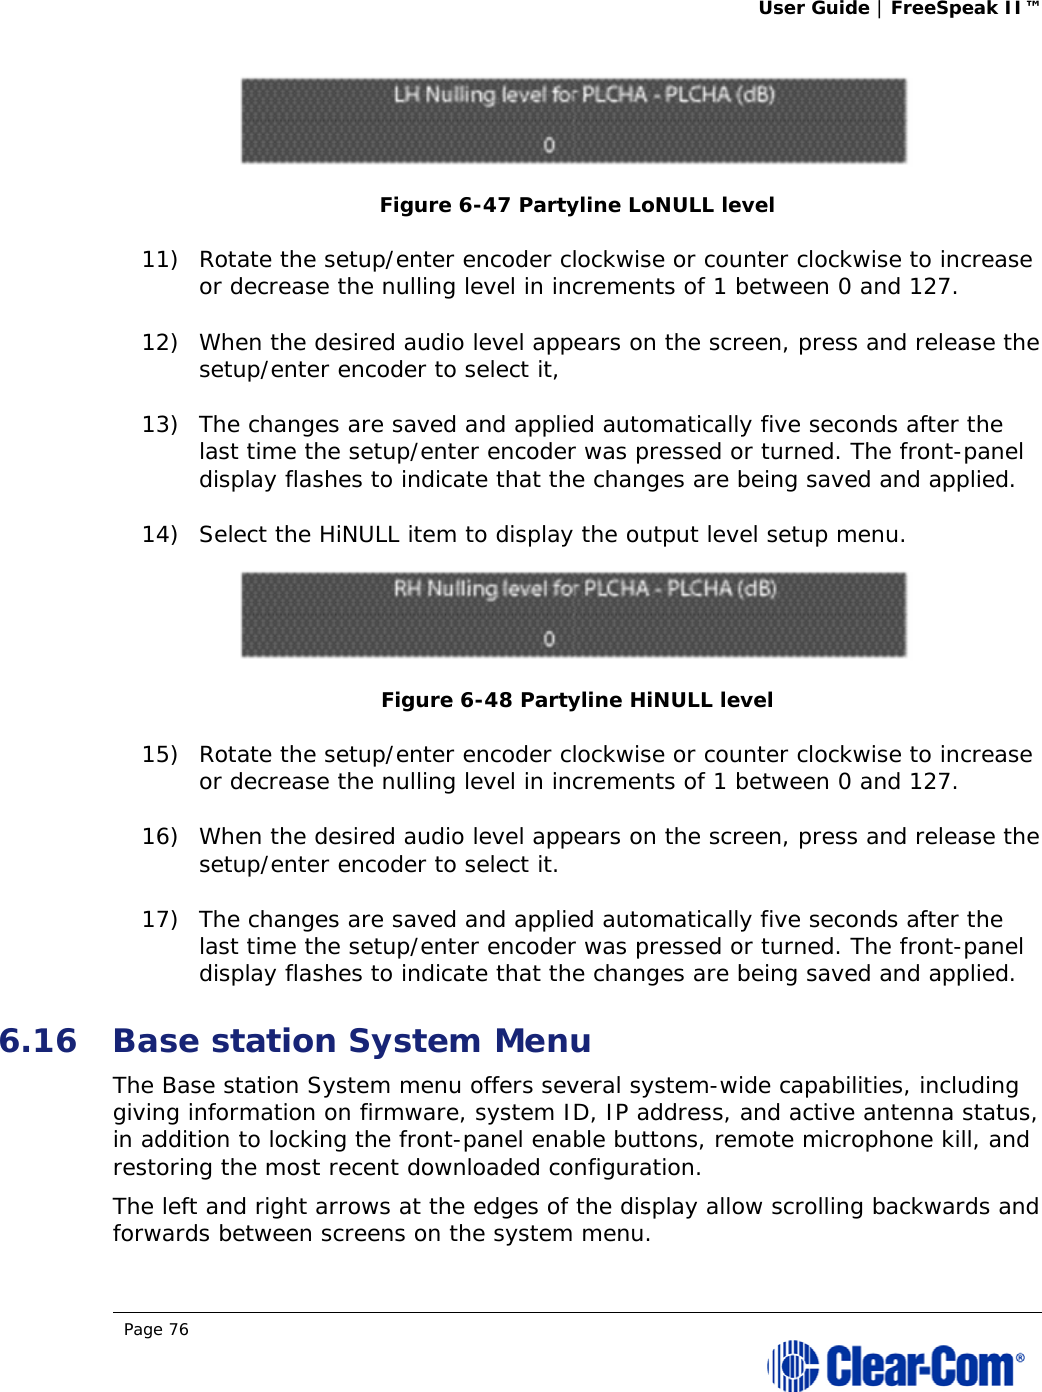 User Guide | FreeSpeak II™  Page 76   Figure 6-47 Partyline LoNULL level 11) Rotate the setup/enter encoder clockwise or counter clockwise to increase or decrease the nulling level in increments of 1 between 0 and 127.  12) When the desired audio level appears on the screen, press and release the setup/enter encoder to select it,  13) The changes are saved and applied automatically five seconds after the last time the setup/enter encoder was pressed or turned. The front-panel display flashes to indicate that the changes are being saved and applied.  14) Select the HiNULL item to display the output level setup menu.  Figure 6-48 Partyline HiNULL level 15) Rotate the setup/enter encoder clockwise or counter clockwise to increase or decrease the nulling level in increments of 1 between 0 and 127.  16) When the desired audio level appears on the screen, press and release the setup/enter encoder to select it. 17) The changes are saved and applied automatically five seconds after the last time the setup/enter encoder was pressed or turned. The front-panel display flashes to indicate that the changes are being saved and applied.  6.16 Base station System Menu The Base station System menu offers several system-wide capabilities, including giving information on firmware, system ID, IP address, and active antenna status, in addition to locking the front-panel enable buttons, remote microphone kill, and restoring the most recent downloaded configuration.  The left and right arrows at the edges of the display allow scrolling backwards and forwards between screens on the system menu. 